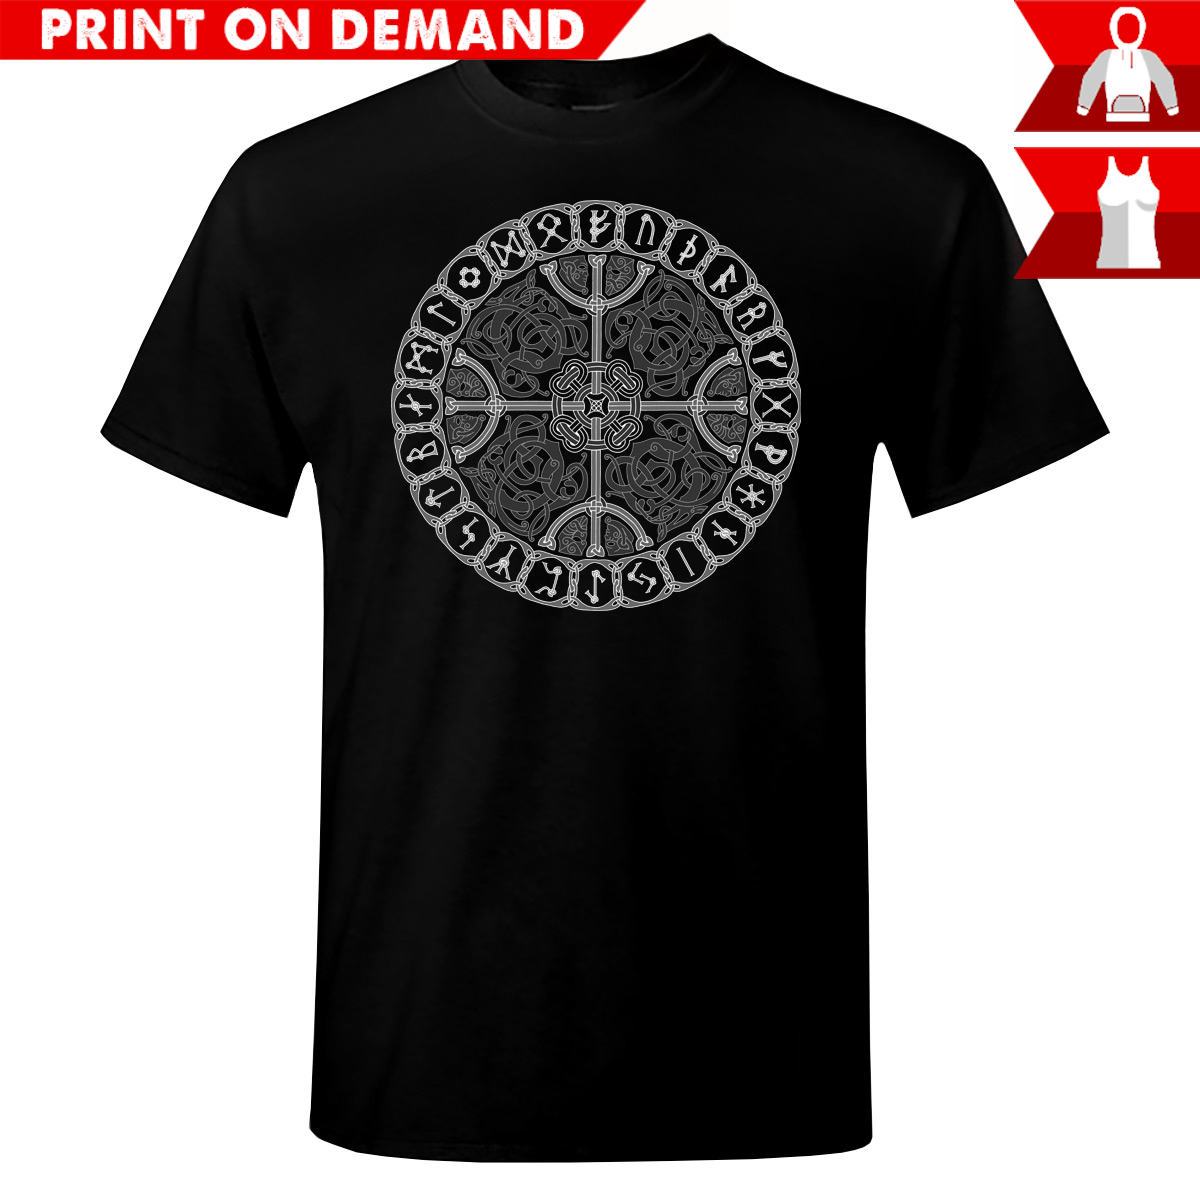 Heilung - Circle Of Stage - Print on demand